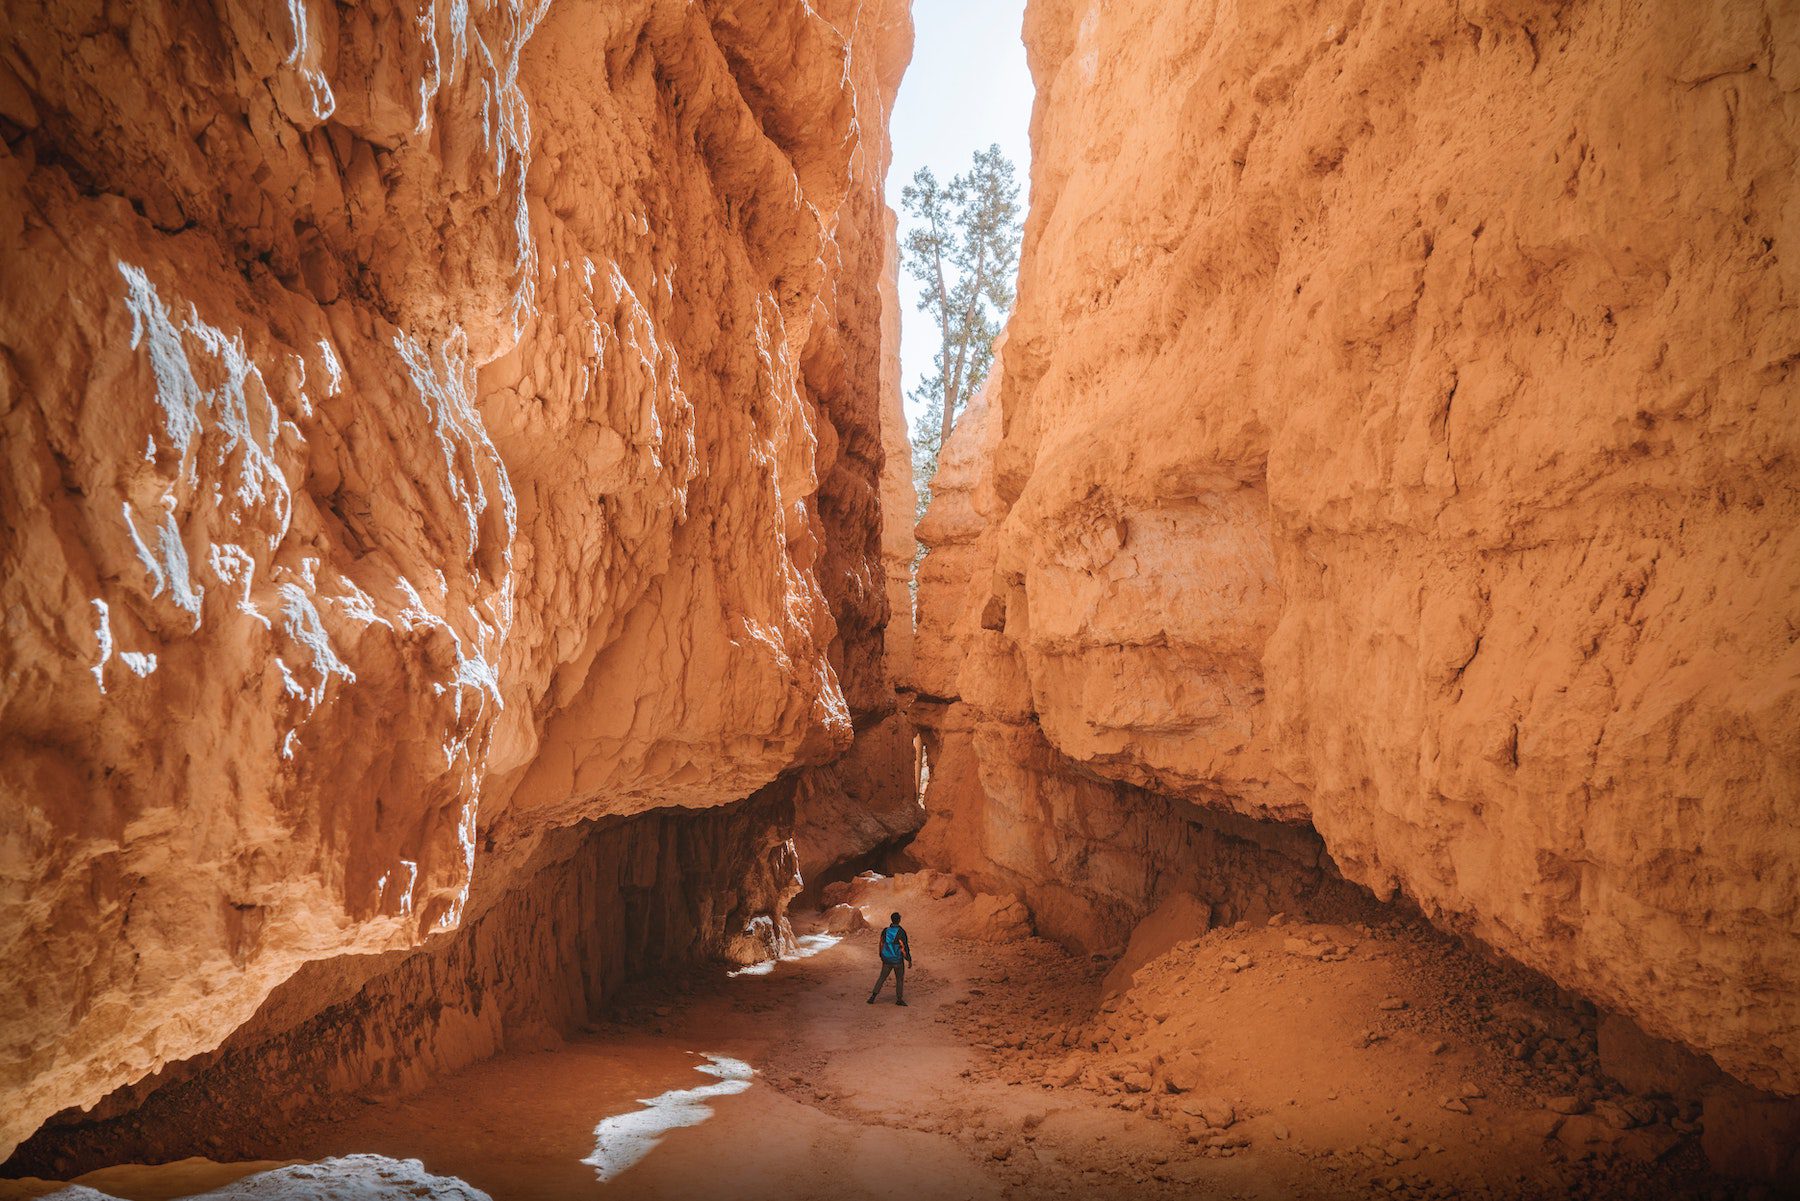 An individual stands between two canyon walls in Bryce Canyon National Park.